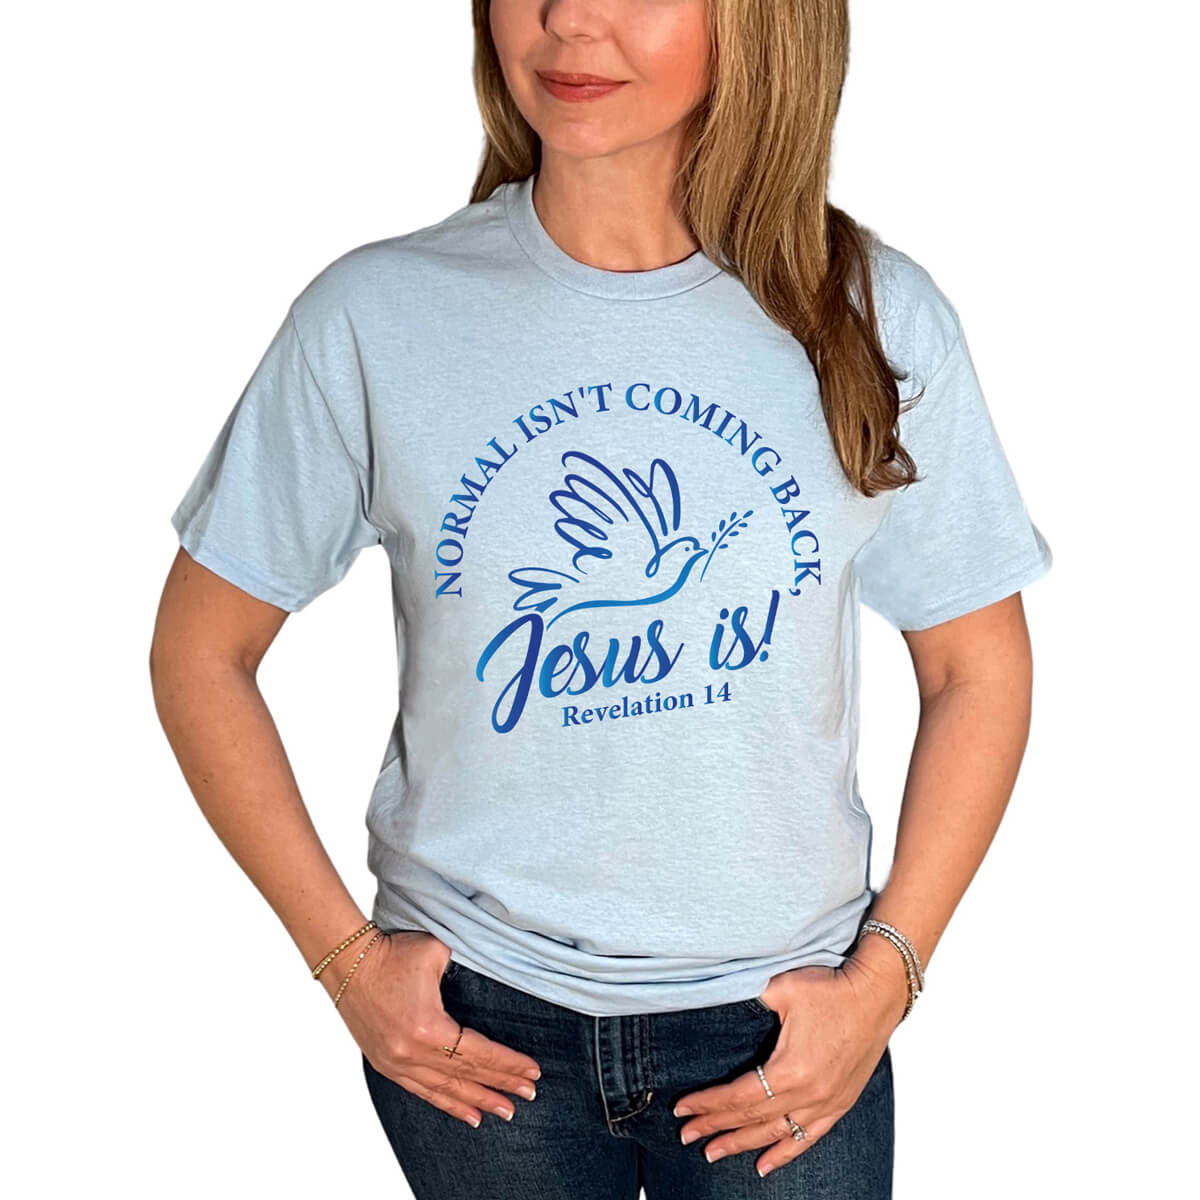 Normal Isn't Coming Back Jesus Is T-Shirt